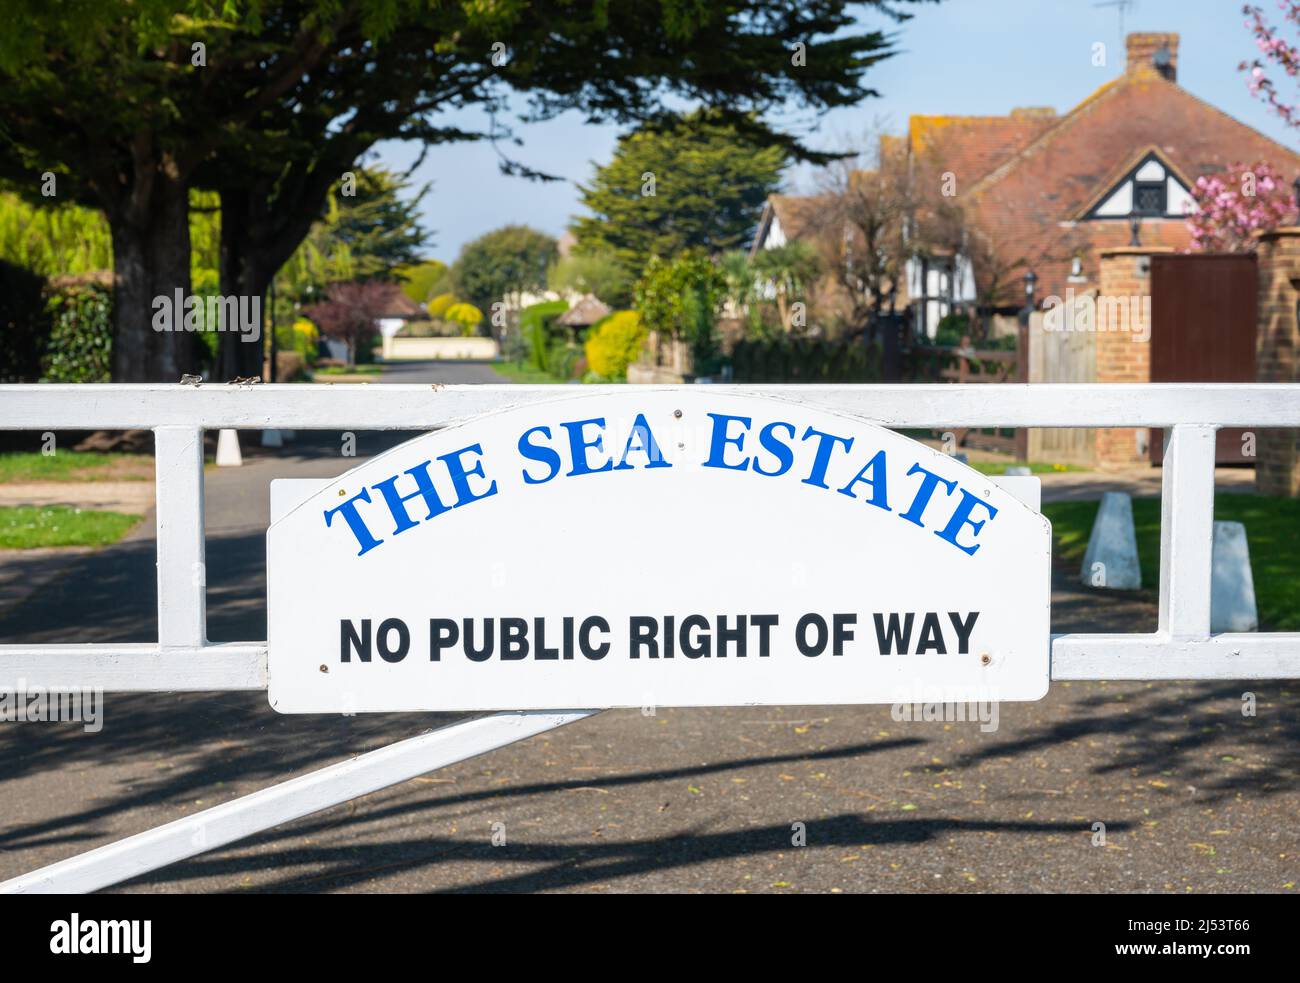 Sign and gate at entrance to The Sea Estate, a private estate with no public right of way in Rustington, West Sussex, England, UK. Stock Photo